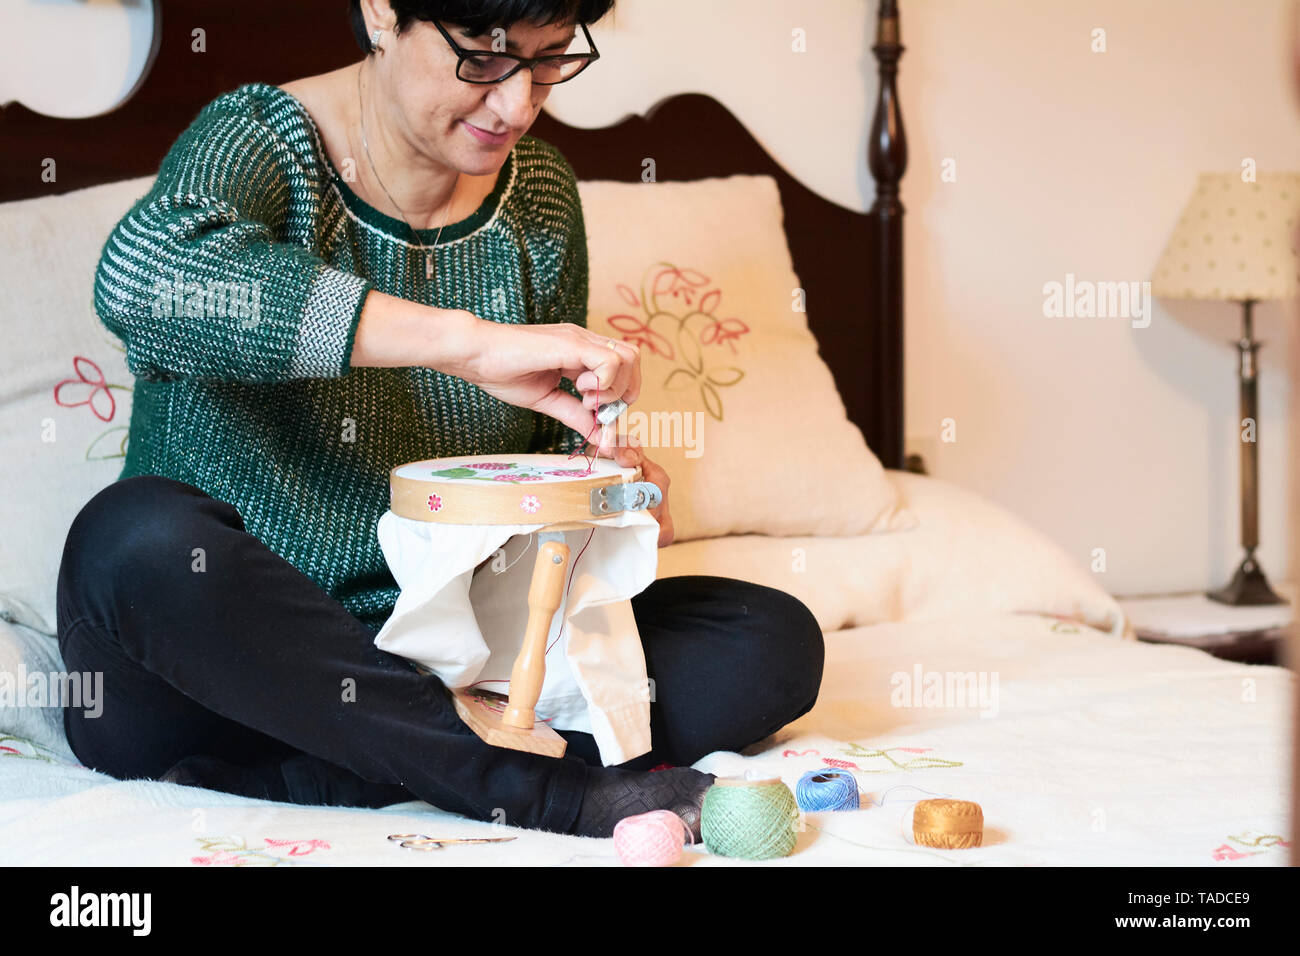 Woman embroidering sitting on bed at home Stock Photo